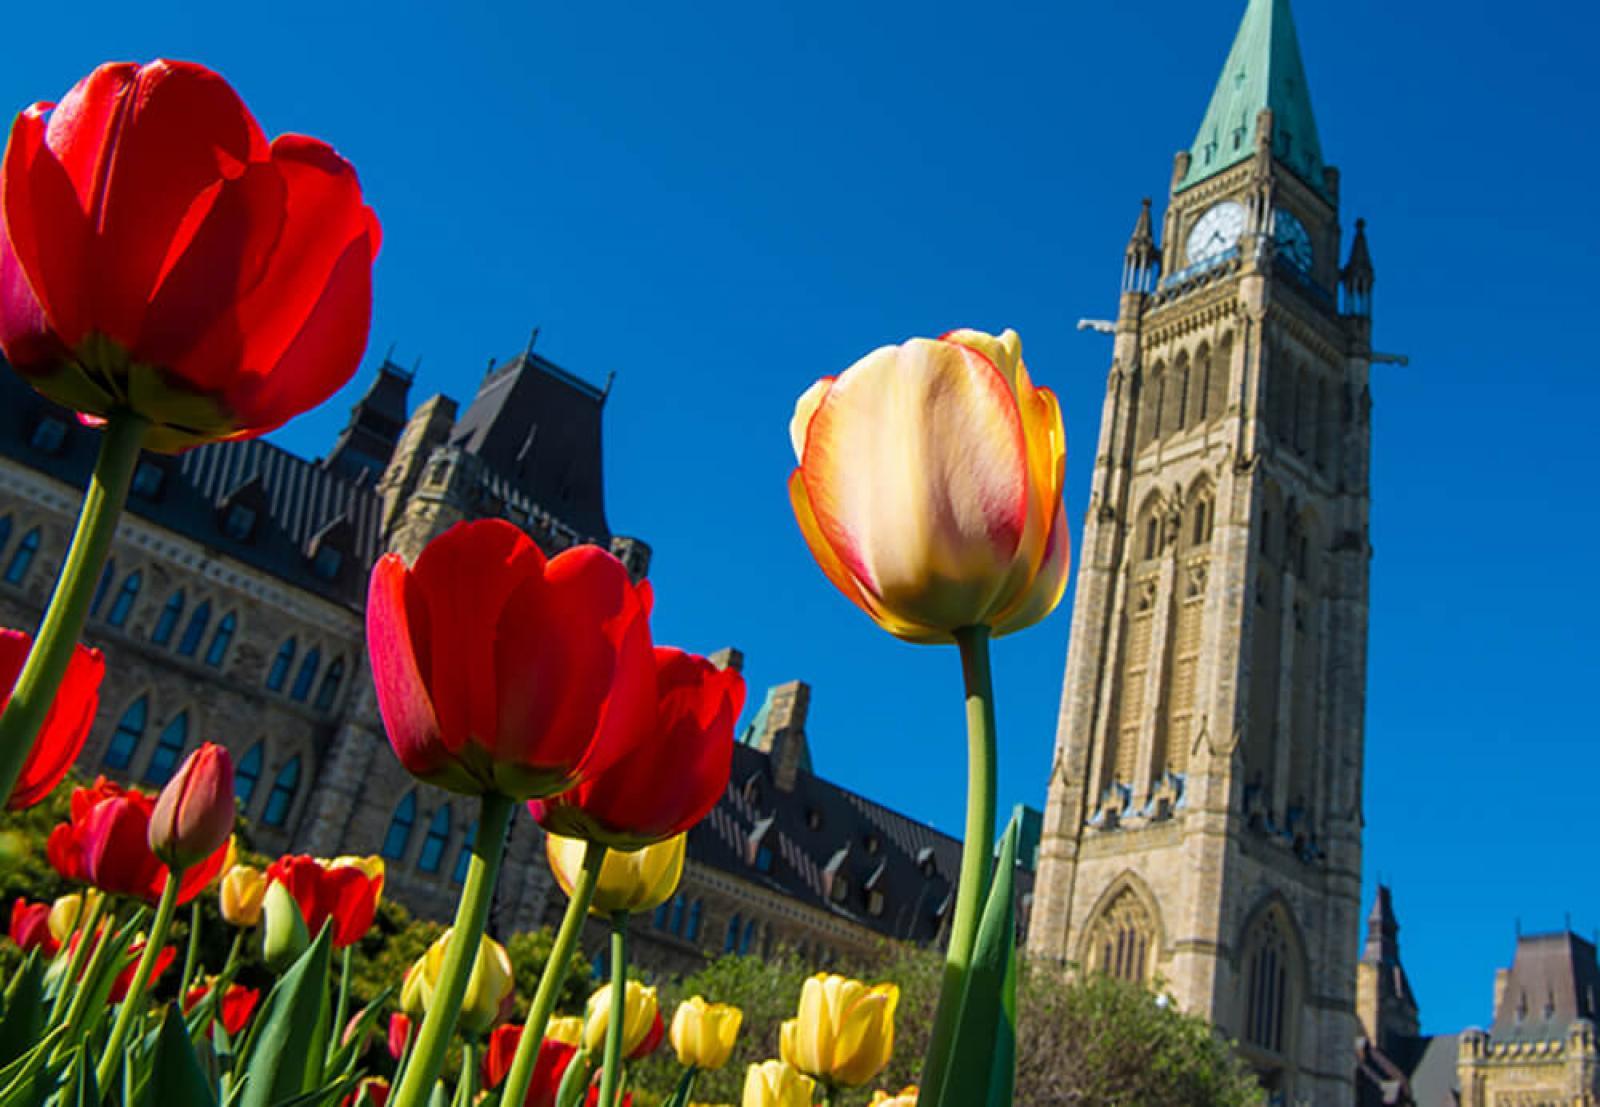 Tulips will take over Ottawa for 11 days in May.